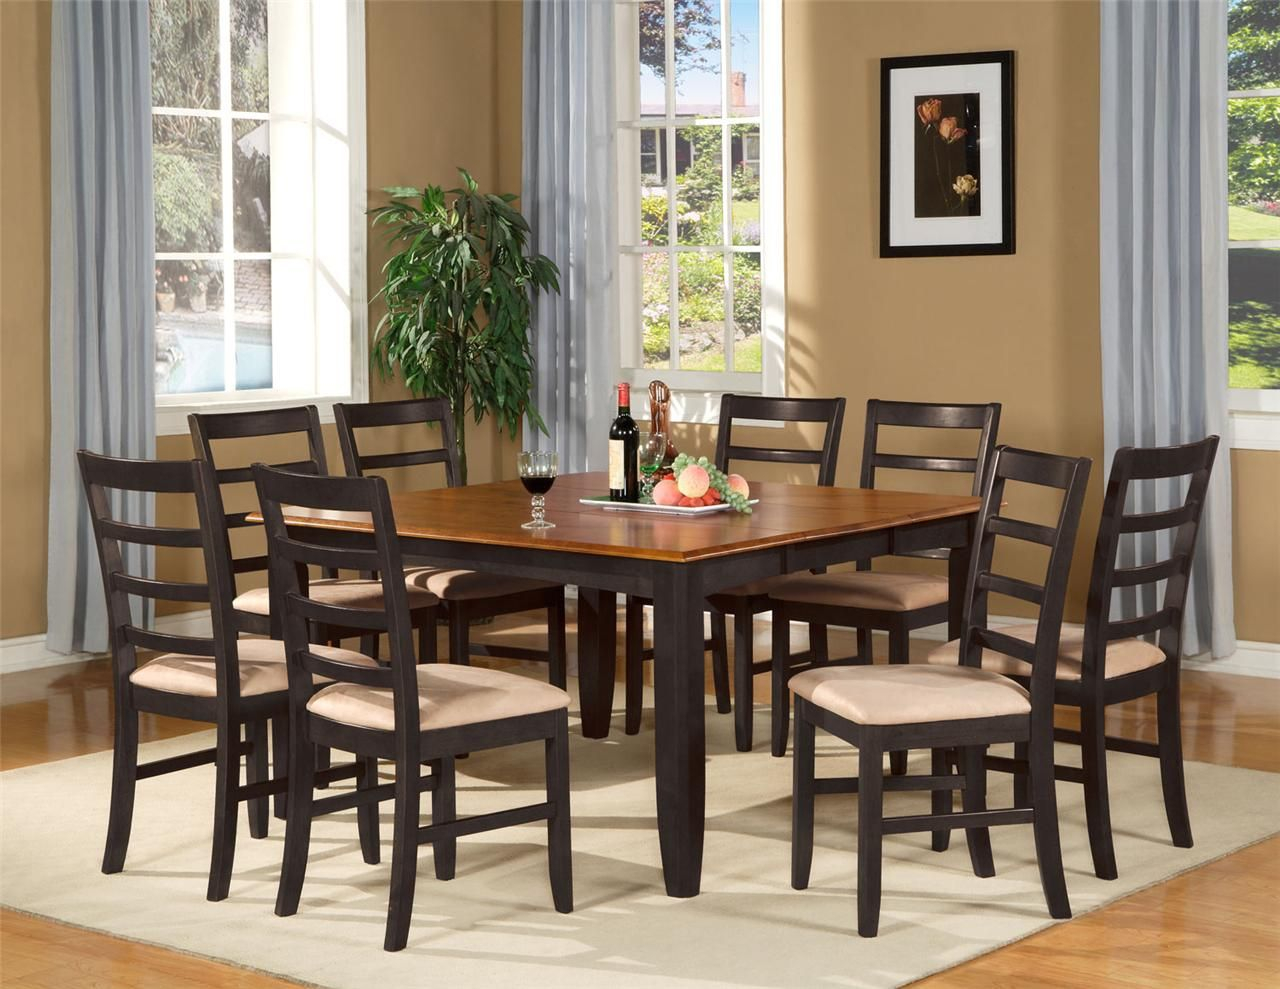 Squre Diing Room Tables Pc Square Dinette Dining Room pertaining to sizing 1280 X 989